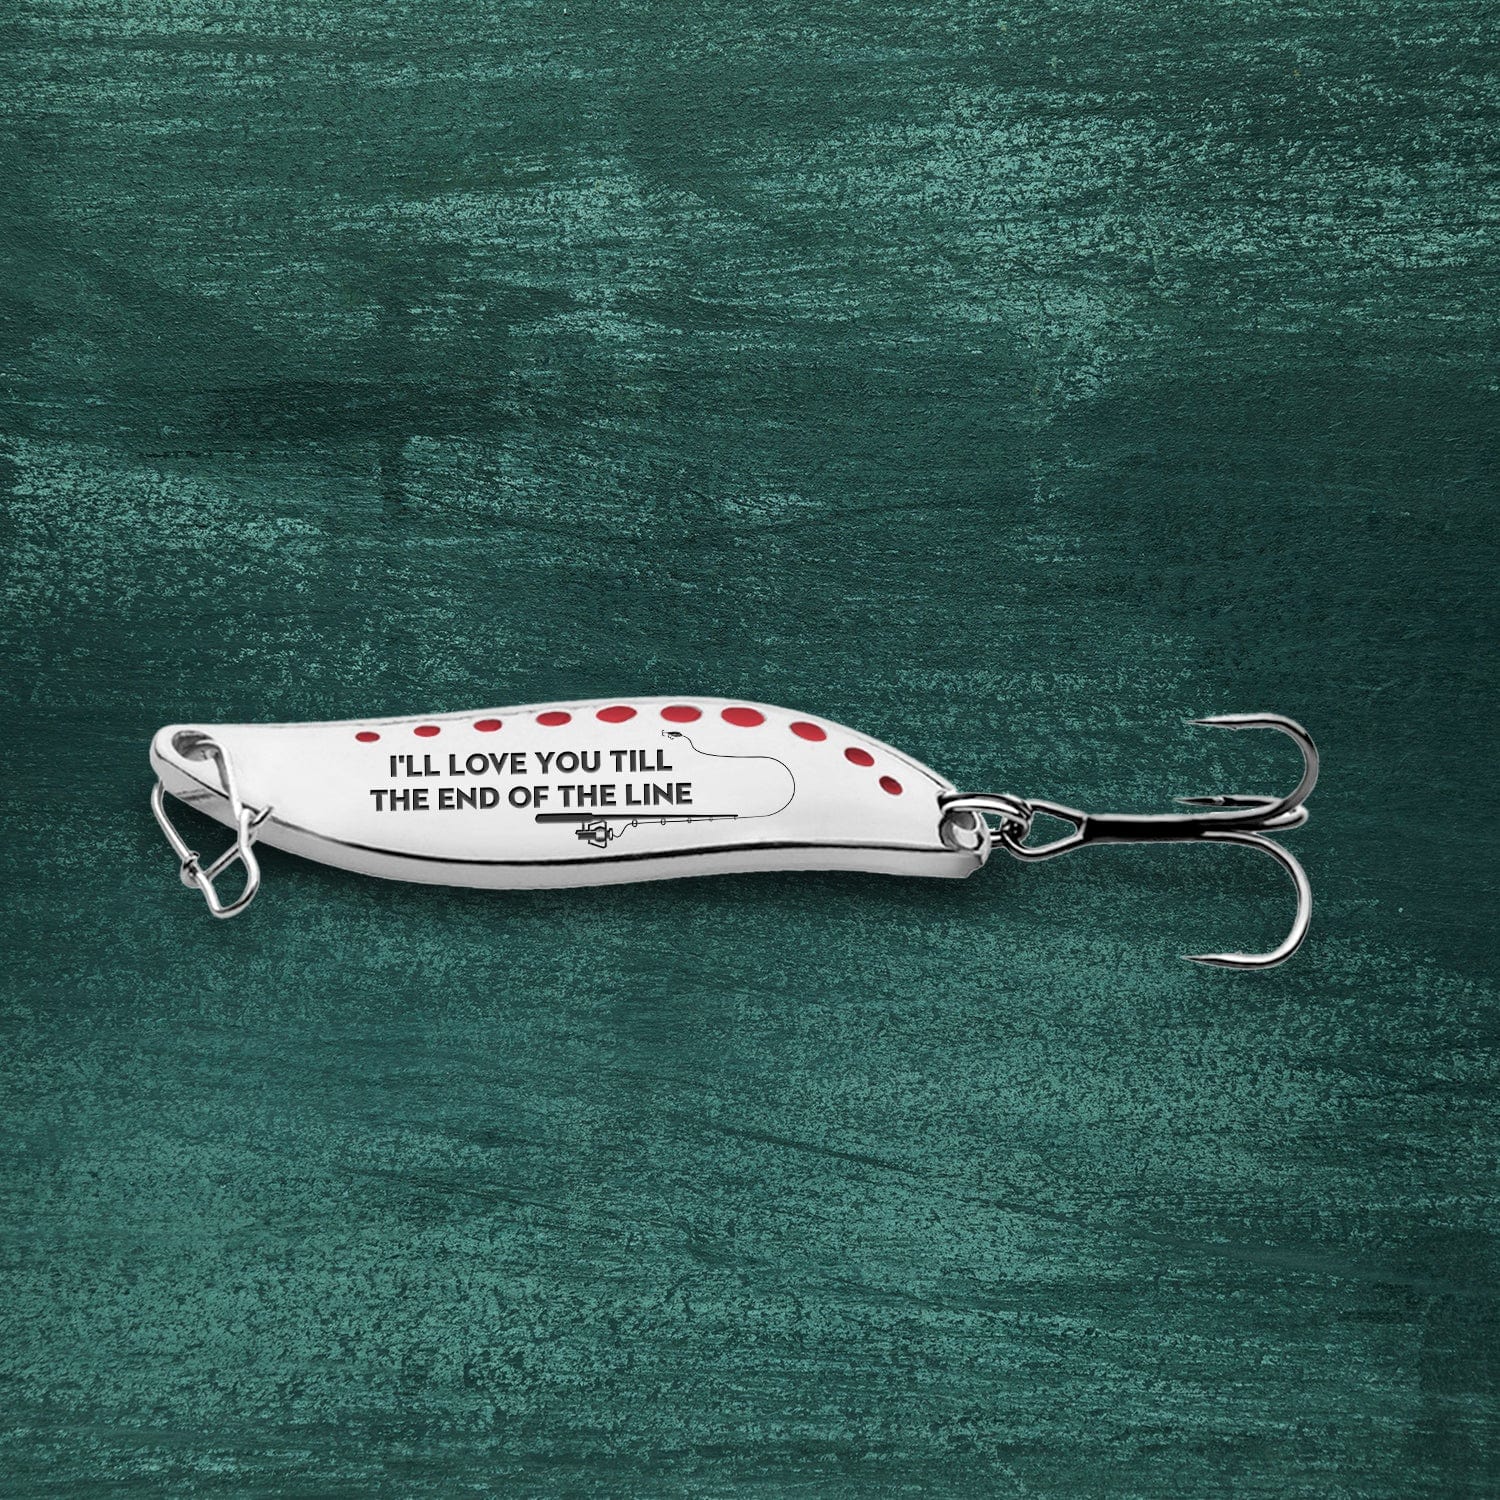 Fishing Lures - Fishing - To My Master Baiter - You Are The